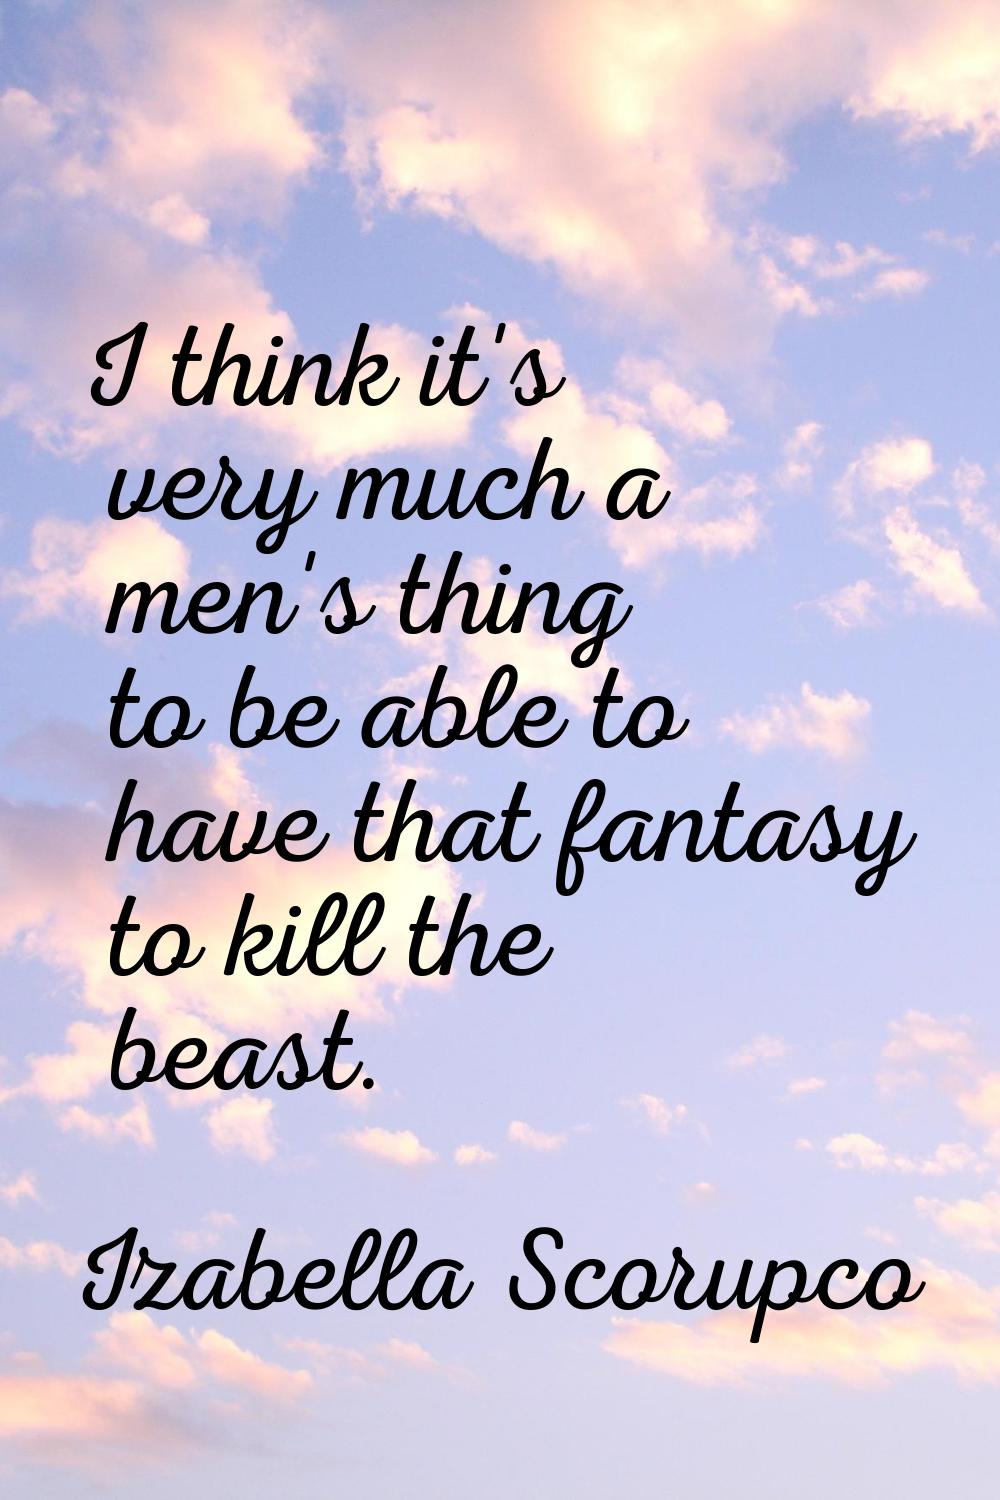 I think it's very much a men's thing to be able to have that fantasy to kill the beast.